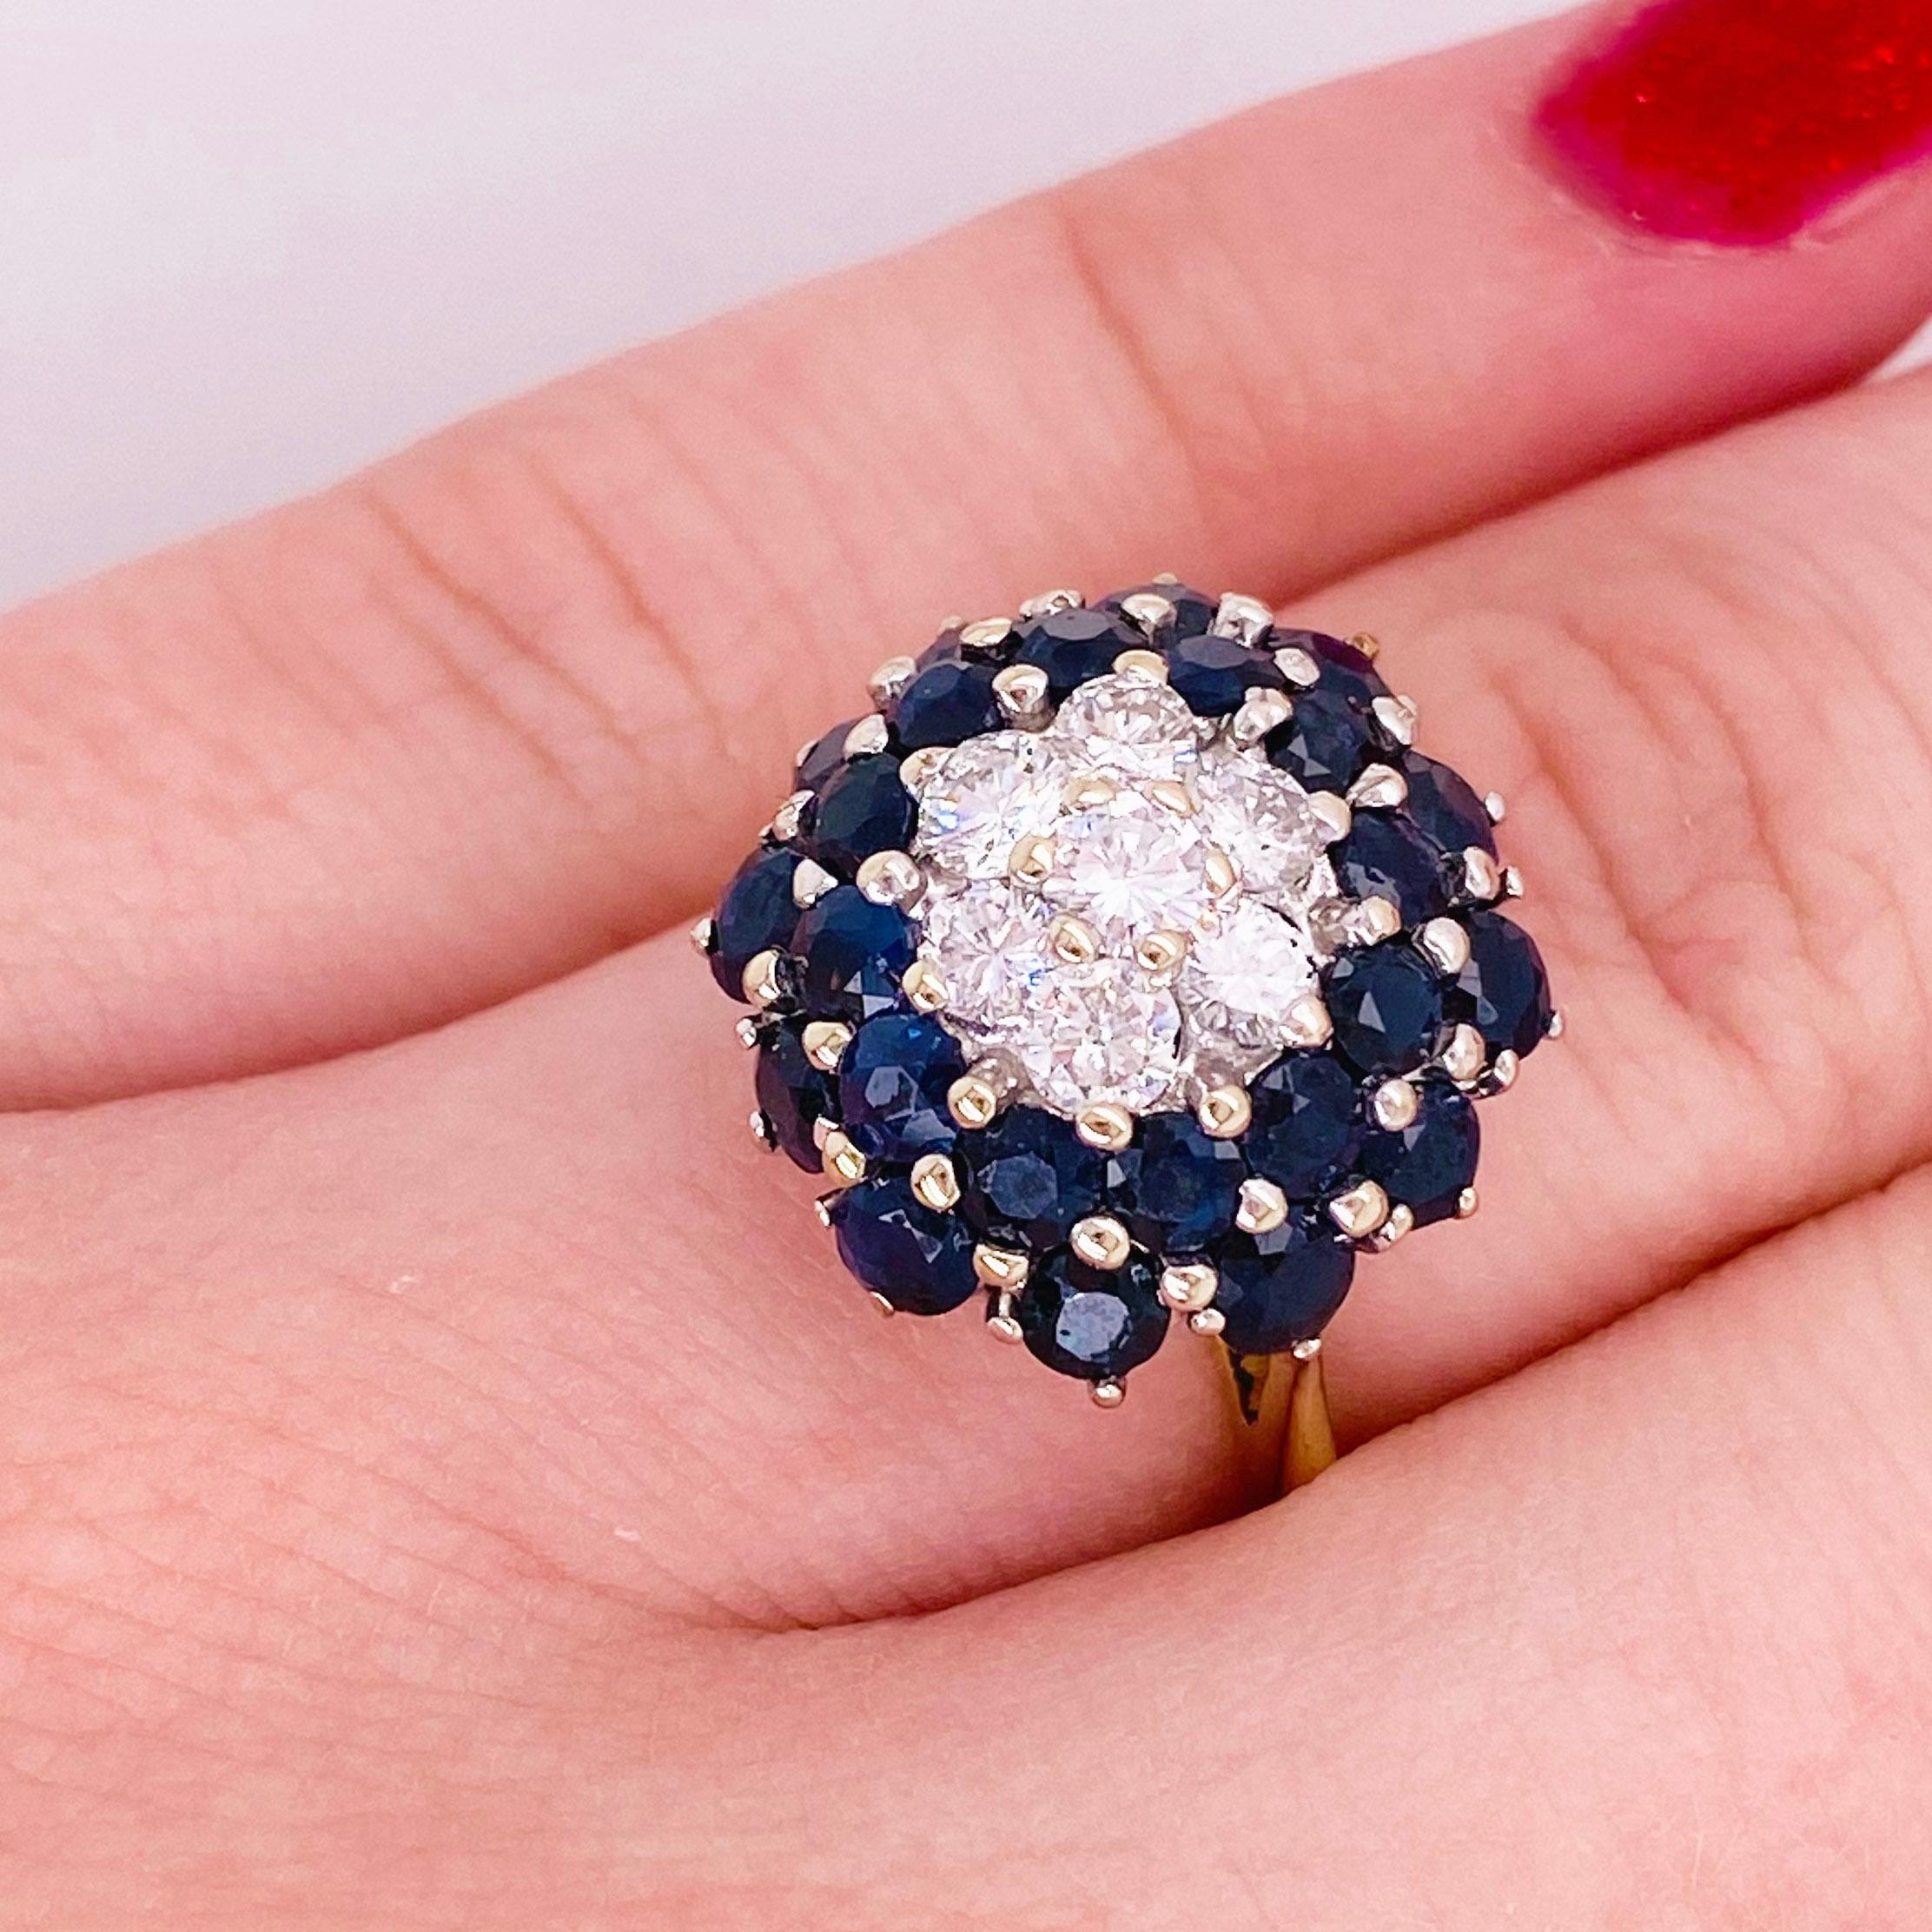 This stunningly beautiful blue sapphire and diamond cluster ring would make anyone  thrilled to receive it!  The deep blue sapphires surrounding gorgeous diamonds set in polished 14K yellow gold provides a look that is very modern and classic at the